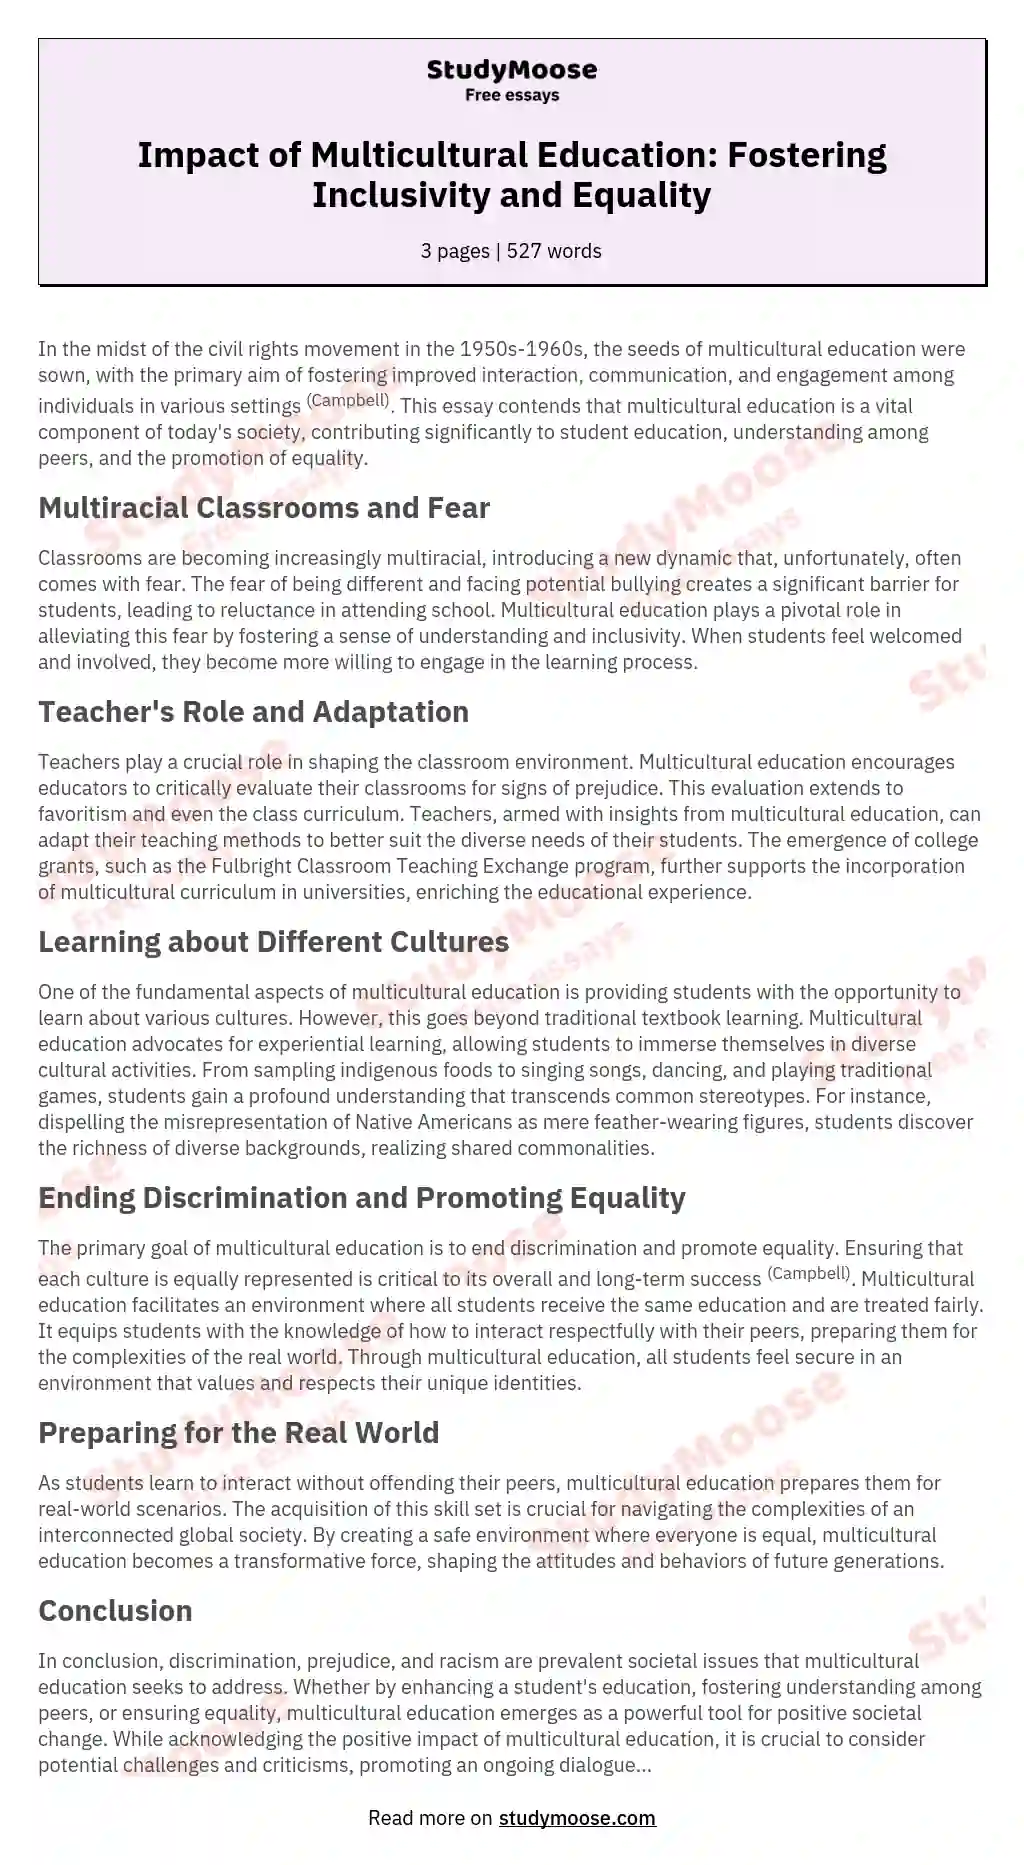 Impact of Multicultural Education: Fostering Inclusivity and Equality essay